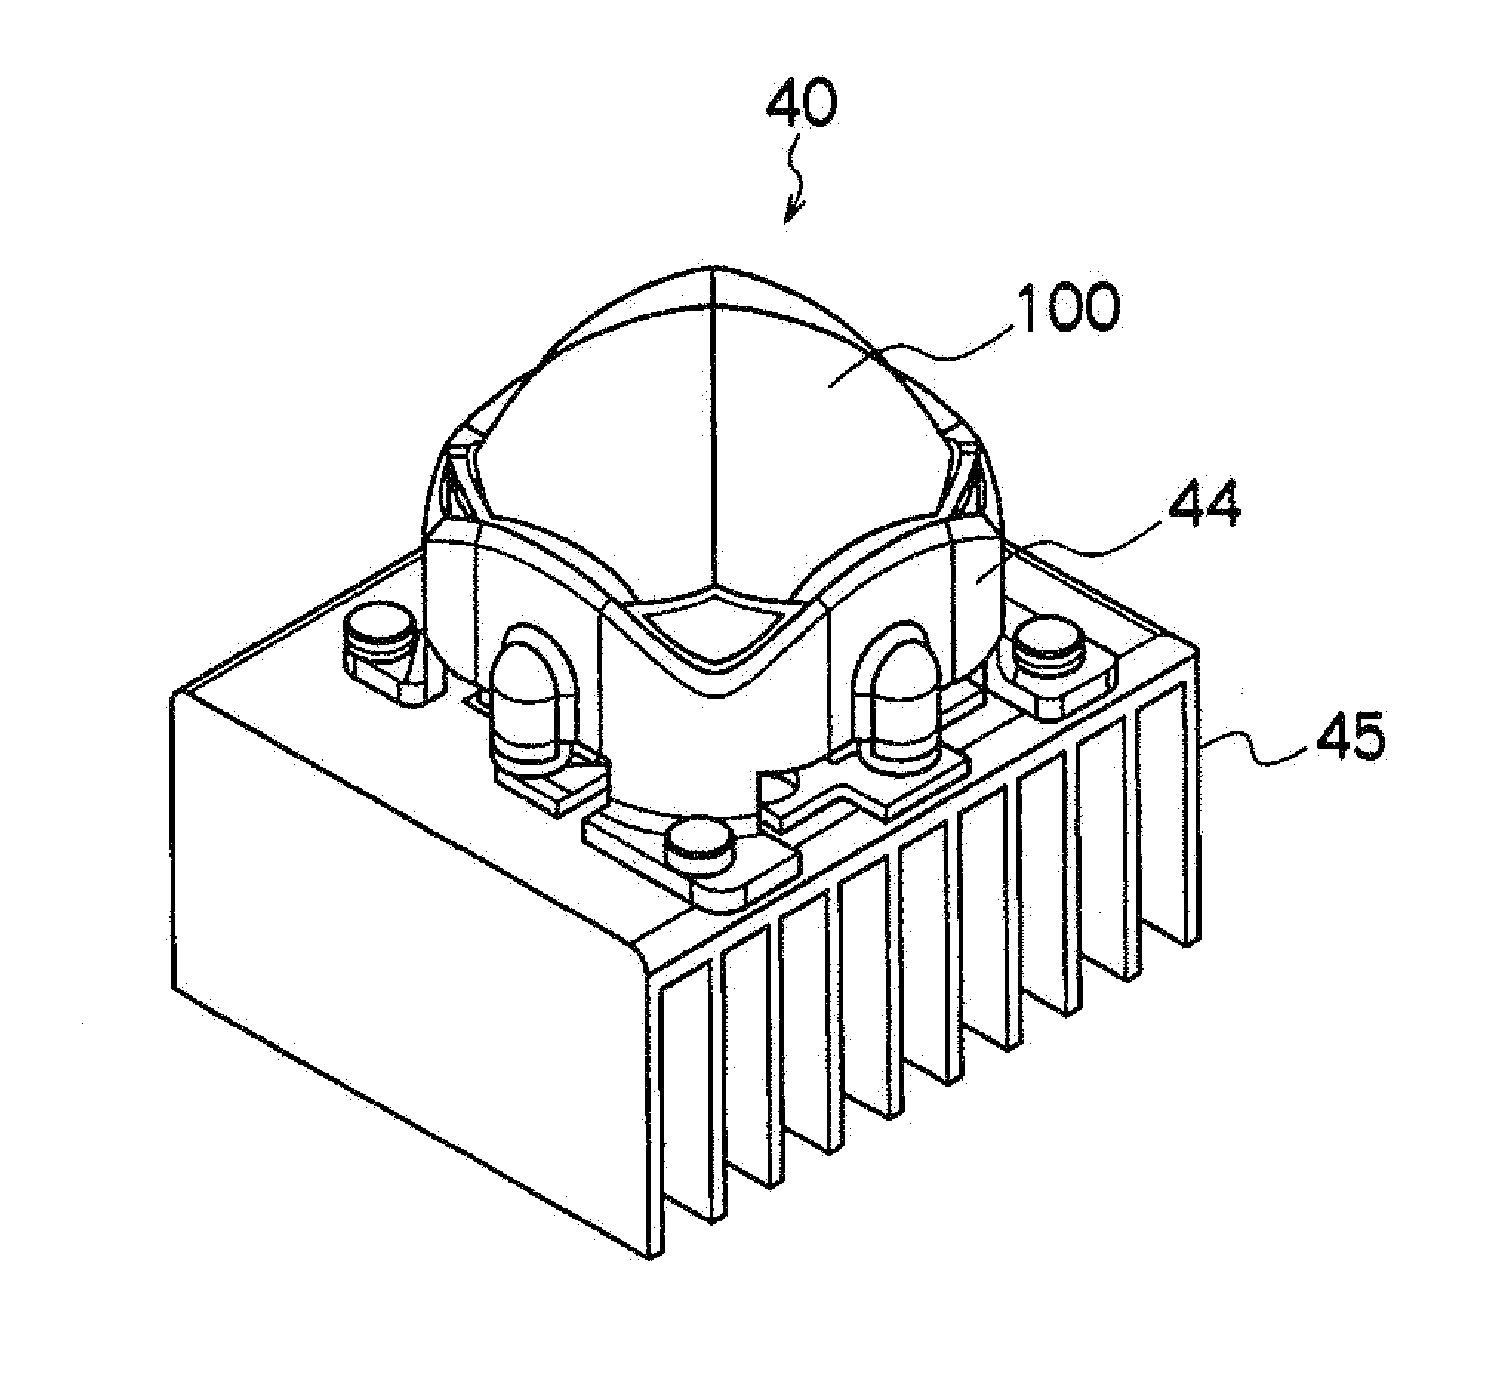 Projection lens for lighting equipment and lighting equipment using projection lens for lighting equipment